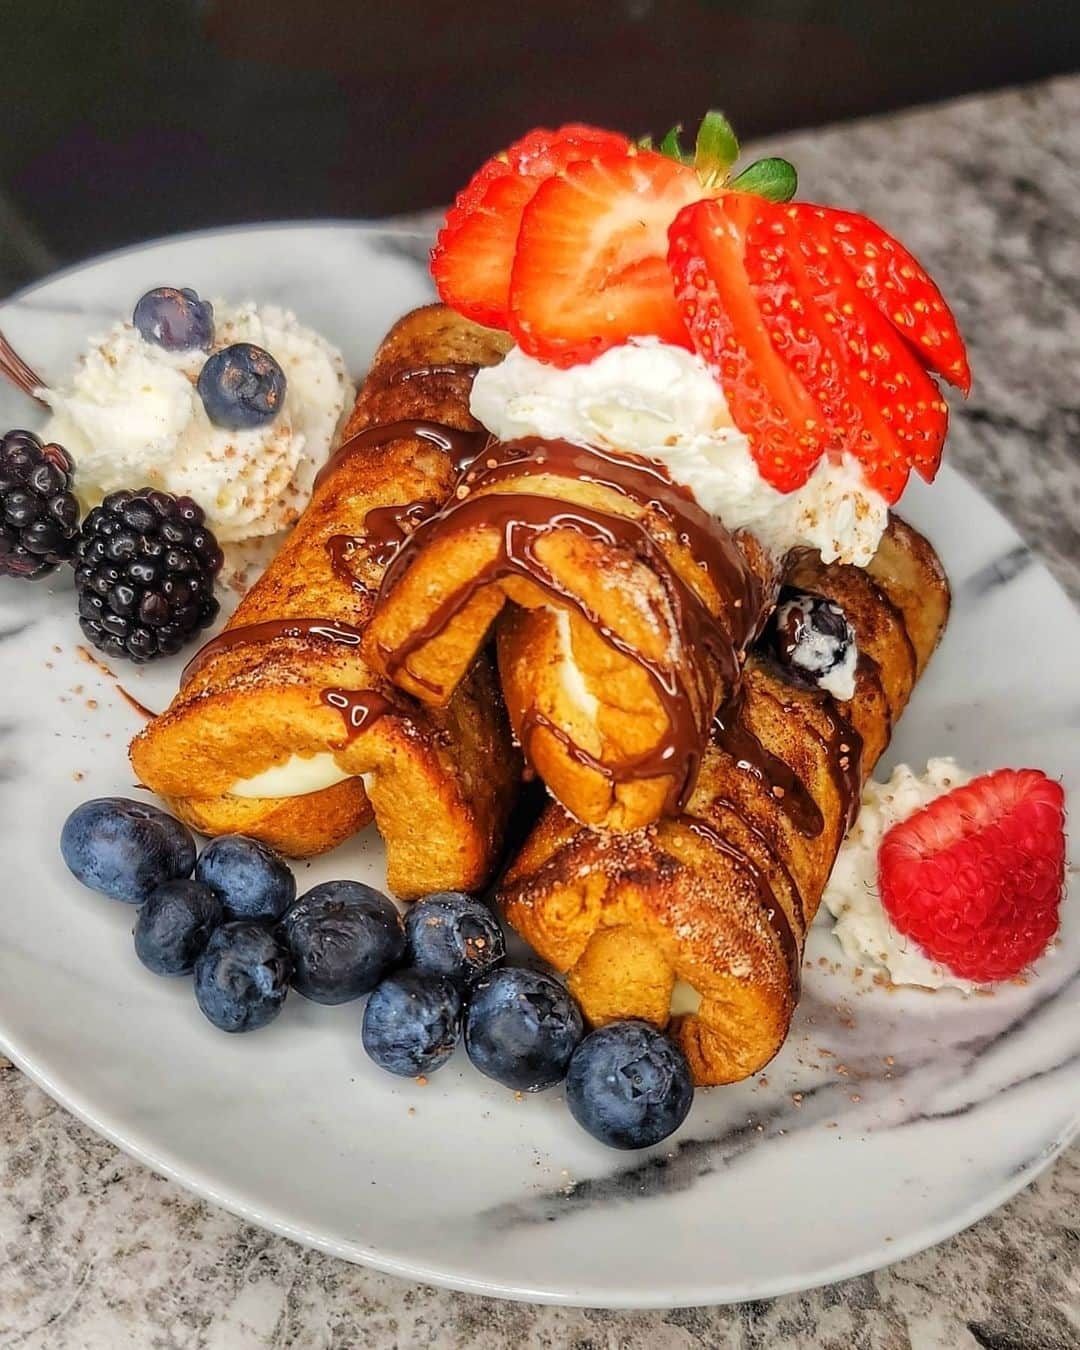 Flavorgod Seasoningsさんのインスタグラム写真 - (Flavorgod SeasoningsInstagram)「Cream cheese French toast roll ups 😋 by @cynfully_lowcarb topped with @flavorgod buttery cinnamon topping⁠ -⁠ Add delicious flavors to your meals!⬇️⁠ Click link in the bio -> @flavorgod  www.flavorgod.com⁠ -⁠ @aldiusa keto bread, egg, cinnamon⁠ @flavorgod buttery cinnamon topping⁠ @meltorganic butter⁠ @lakanto powdered sweetener⁠ @choczero keto hazelnut spread⁠ •Sugar free whipped cream and berries⁠ •Cream cheese frosting⁠ 1 block cream cheese⁠ 1/4 C @meltorganic butter⁠ 1 C @lakanto powdered sugar⁠ 1/2 t vanilla extract⁠ -mix until smooth. Add to piping bag.⁠ ⁠ -Flattened bread with a rolling pin. Added cream cheese frosting on short edge and rolled. Closed with toothpick. Dipped in a whipped egg with @flavorgod buttery cinnamon topping, fried with @meltorganic butter on all sides in a pan. Rolled in cinnamon and powdered @lakanto. Topped with @choczero keto hazelnut spread, sugar free whipped cream and berries 👌⁠ -⁠ Flavor God Seasonings are:⁠ 💥 Zero Calories per Serving ⁠ 💥 KETO & PALEO⁠ 💥 VEGAN Options ⁠ 💥 Low Salt⁠ 💥 GLUTEN FREE & KOSHER⁠ 💥 NO MSG⁠ 💥 DAIRY FREE Options⁠ 💥 All Natural & Made Fresh⁠ 💥 Shelf life is 24 Months⁠ -⁠ #food #foodie #flavorgod #seasonings #glutenfree #mealprep #seasonings #breakfast #lunch #dinner #yummy #delicious #foodporn」2月6日 22時01分 - flavorgod